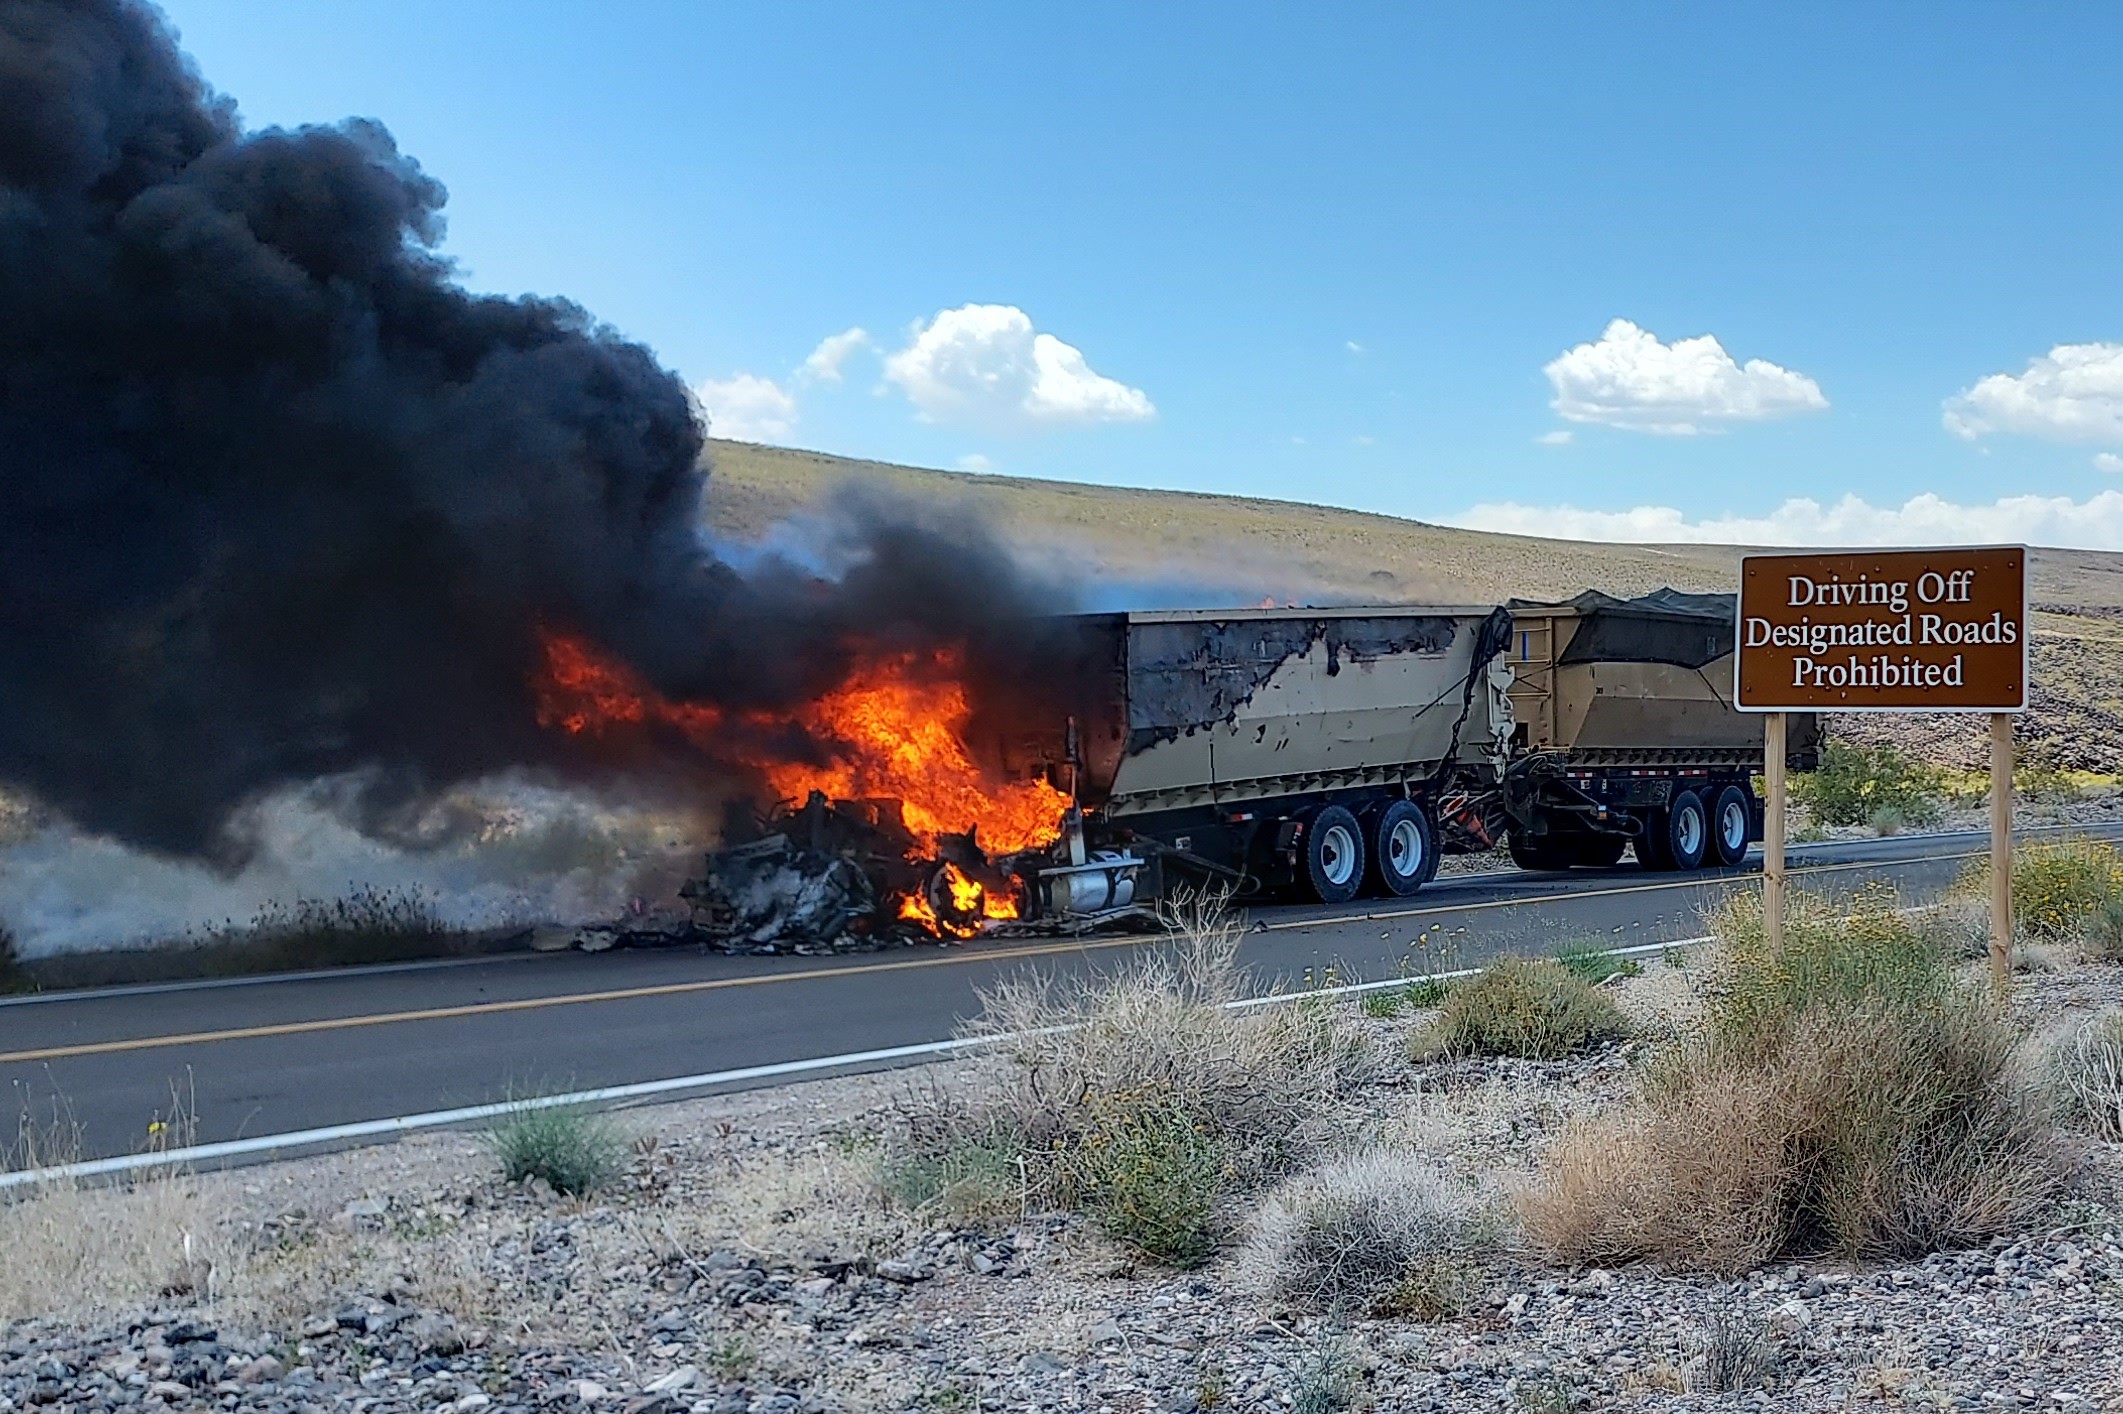 Black smoke billows out from bright red flames that are fully engulfing the engine and cab of a semi-truck. Two tan trailers are behind it. In the foreground on right is a brown sign, "Driving Off Designated Roads Prohibited".